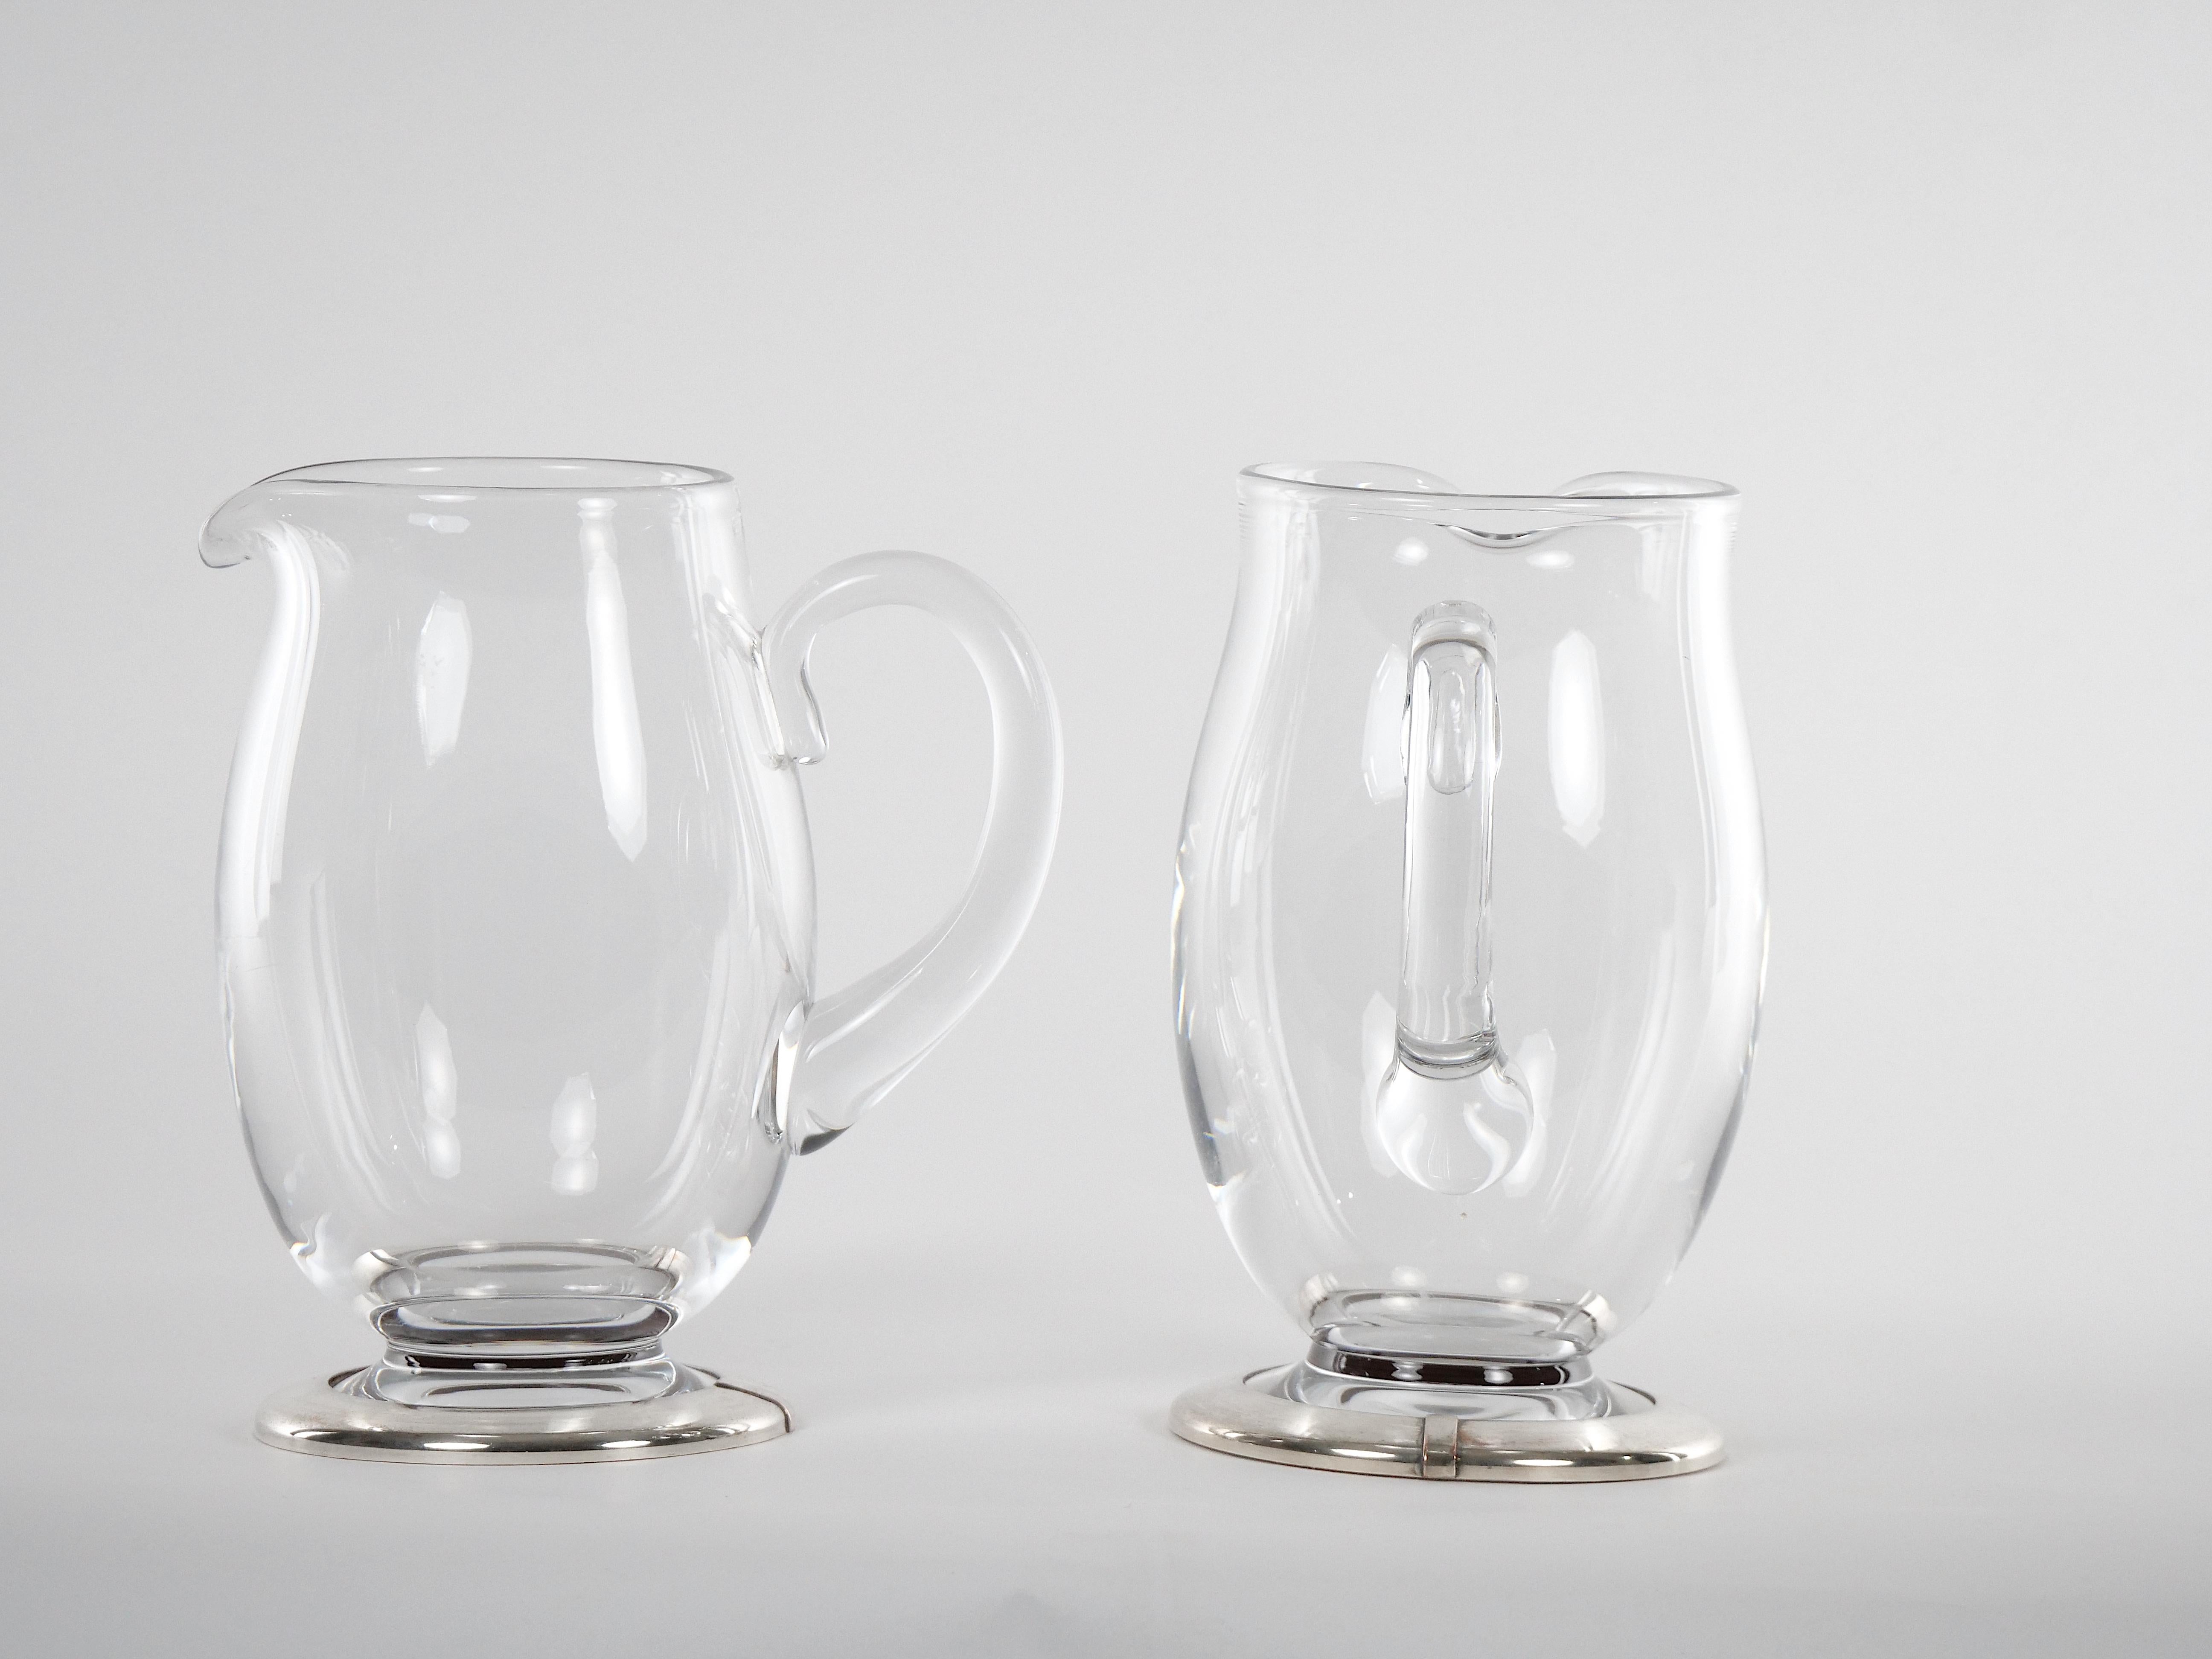 Hand Crafted pair baccarat crystal with silver plate base tableware / barware serving pitcher. Each pitcher features a very clean line & pleasing look in the art deco style with a round silver plate base. Each pitcher is without any cracks, chips or